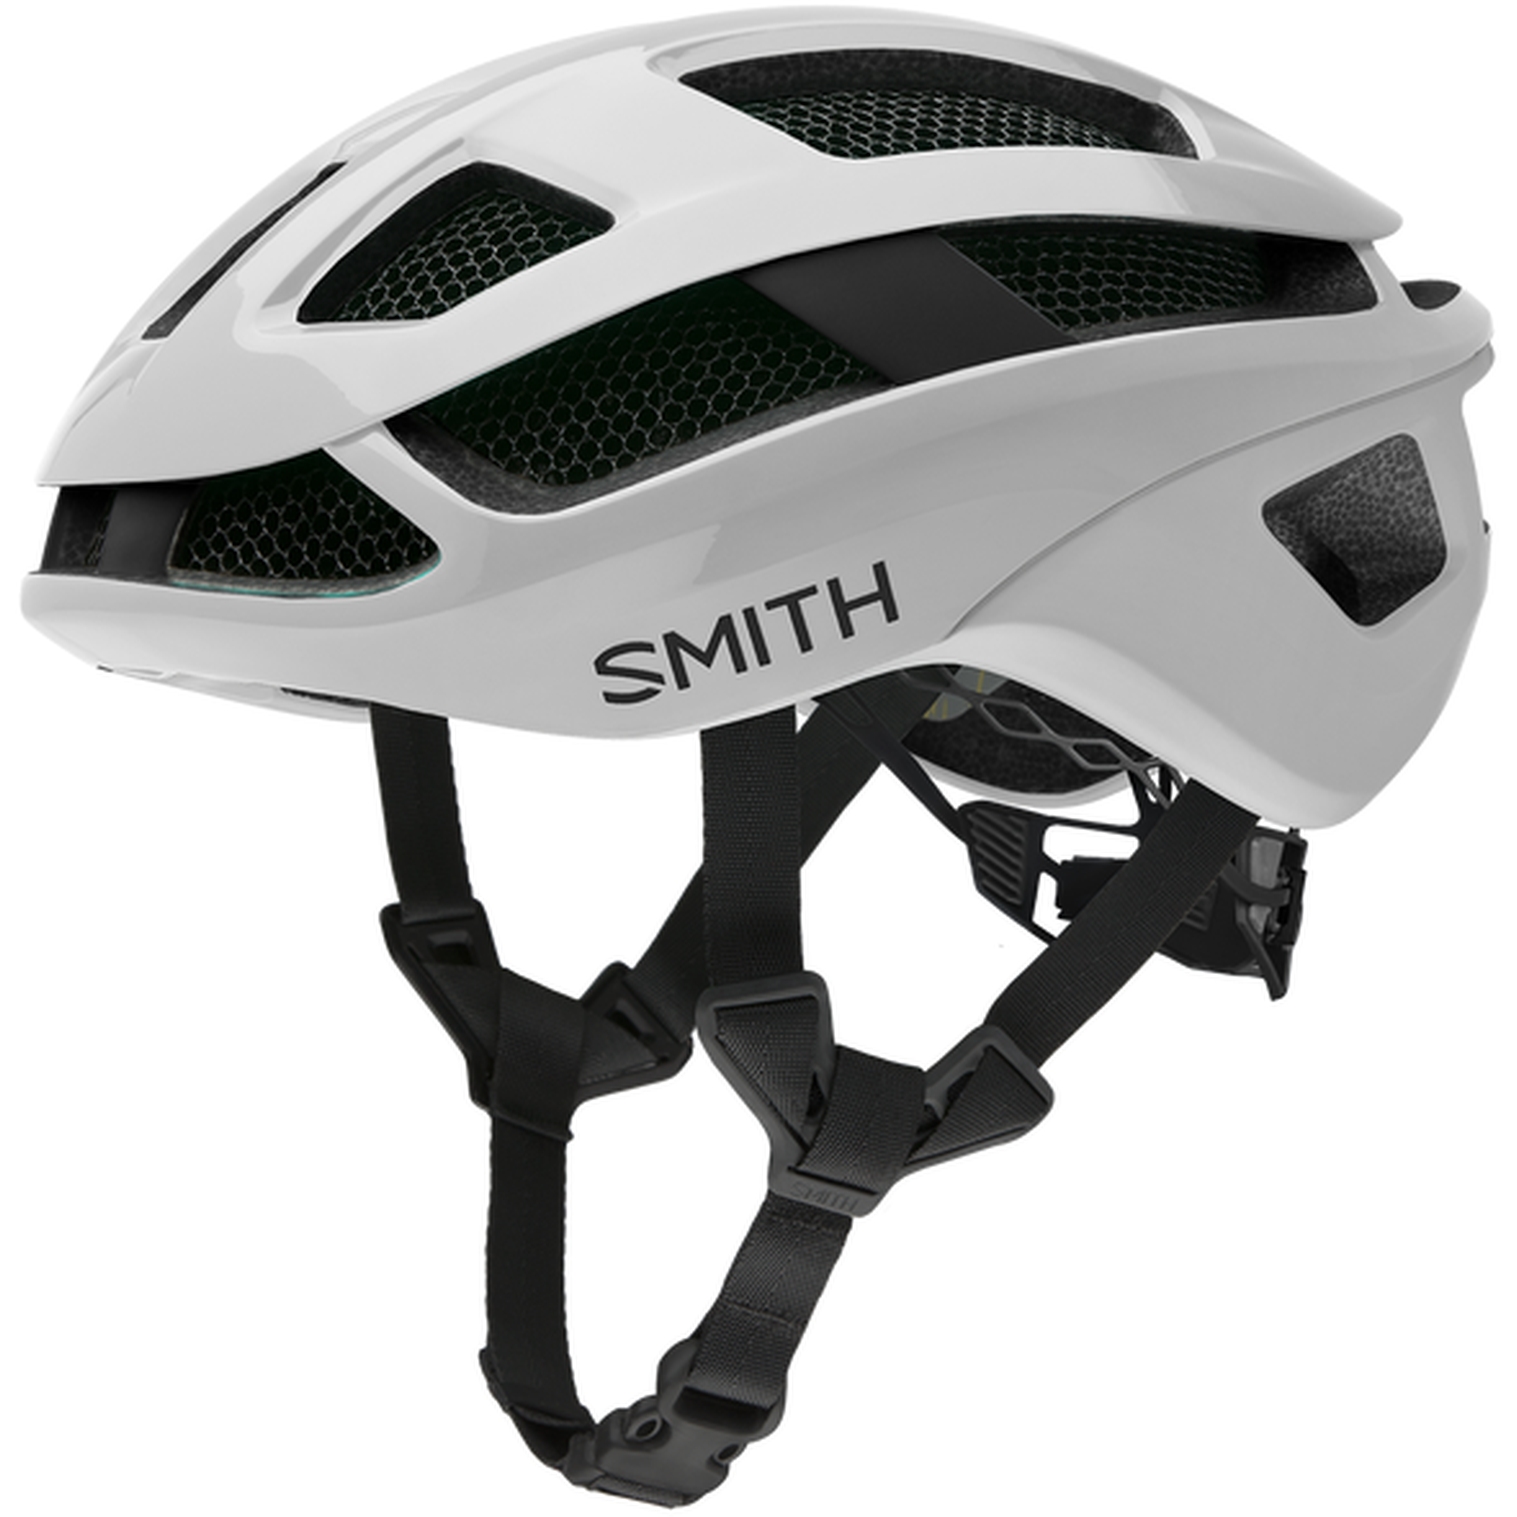 Productfoto van Smith Trace MIPS Helm - White - Matte White